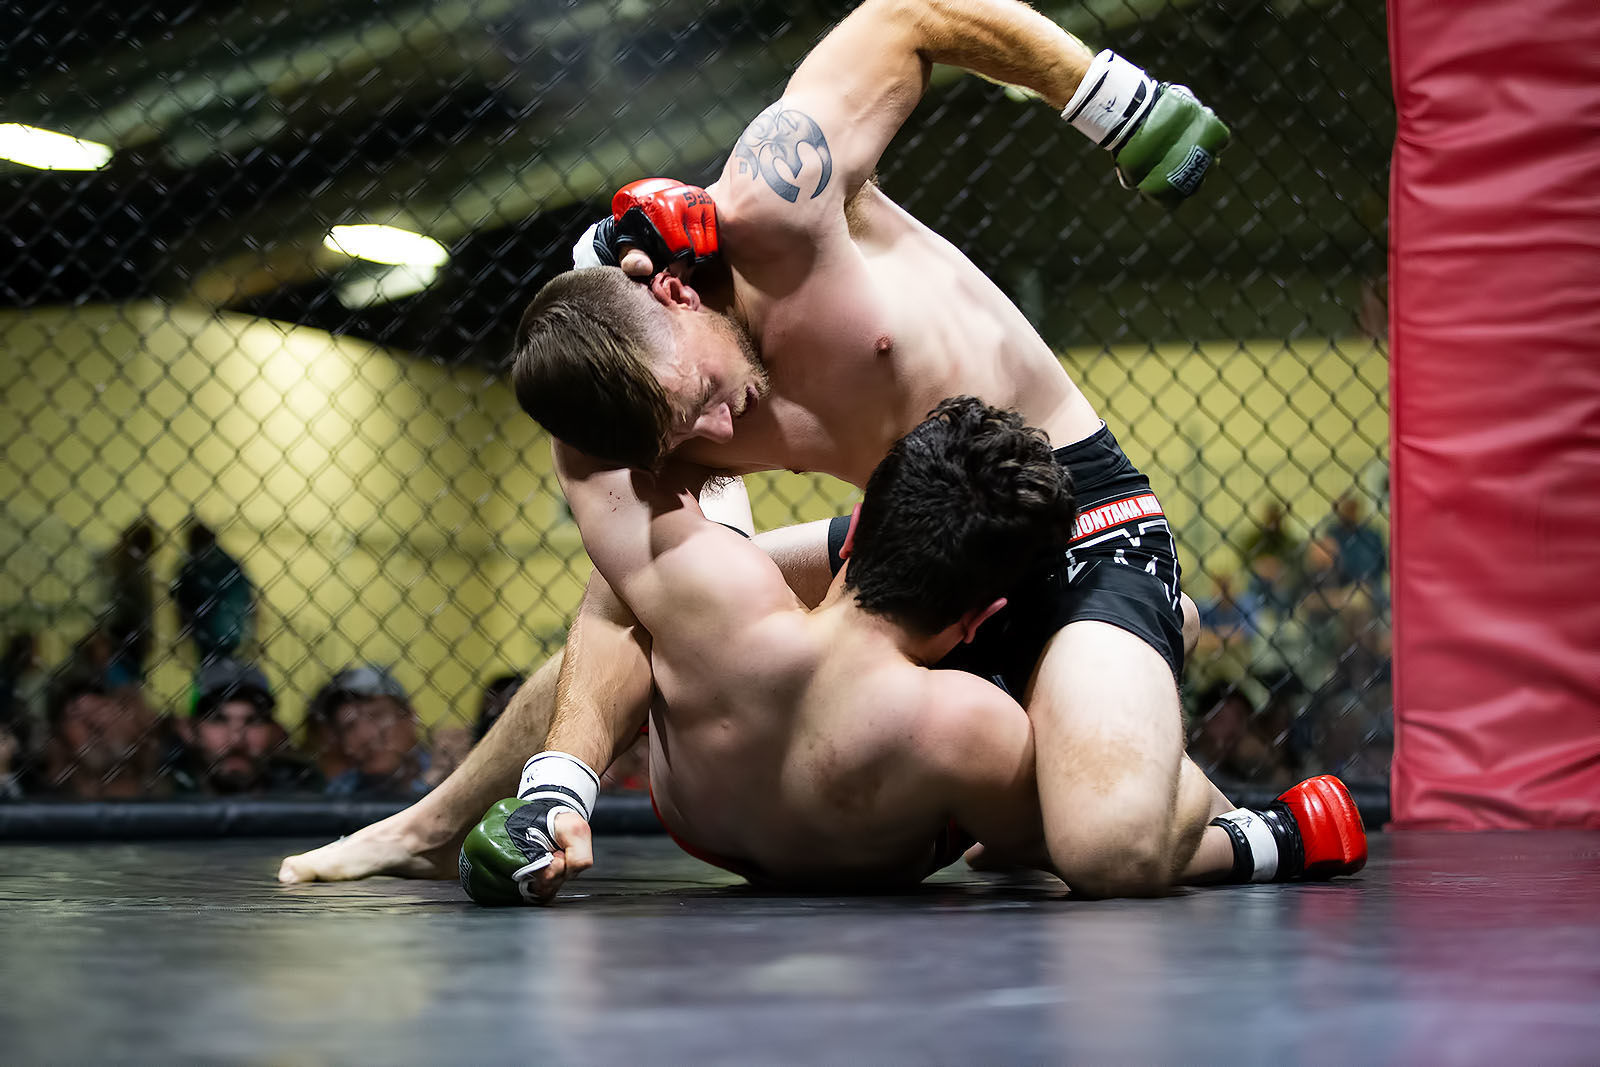 Amateur MMA fighters compete for the love of the sport